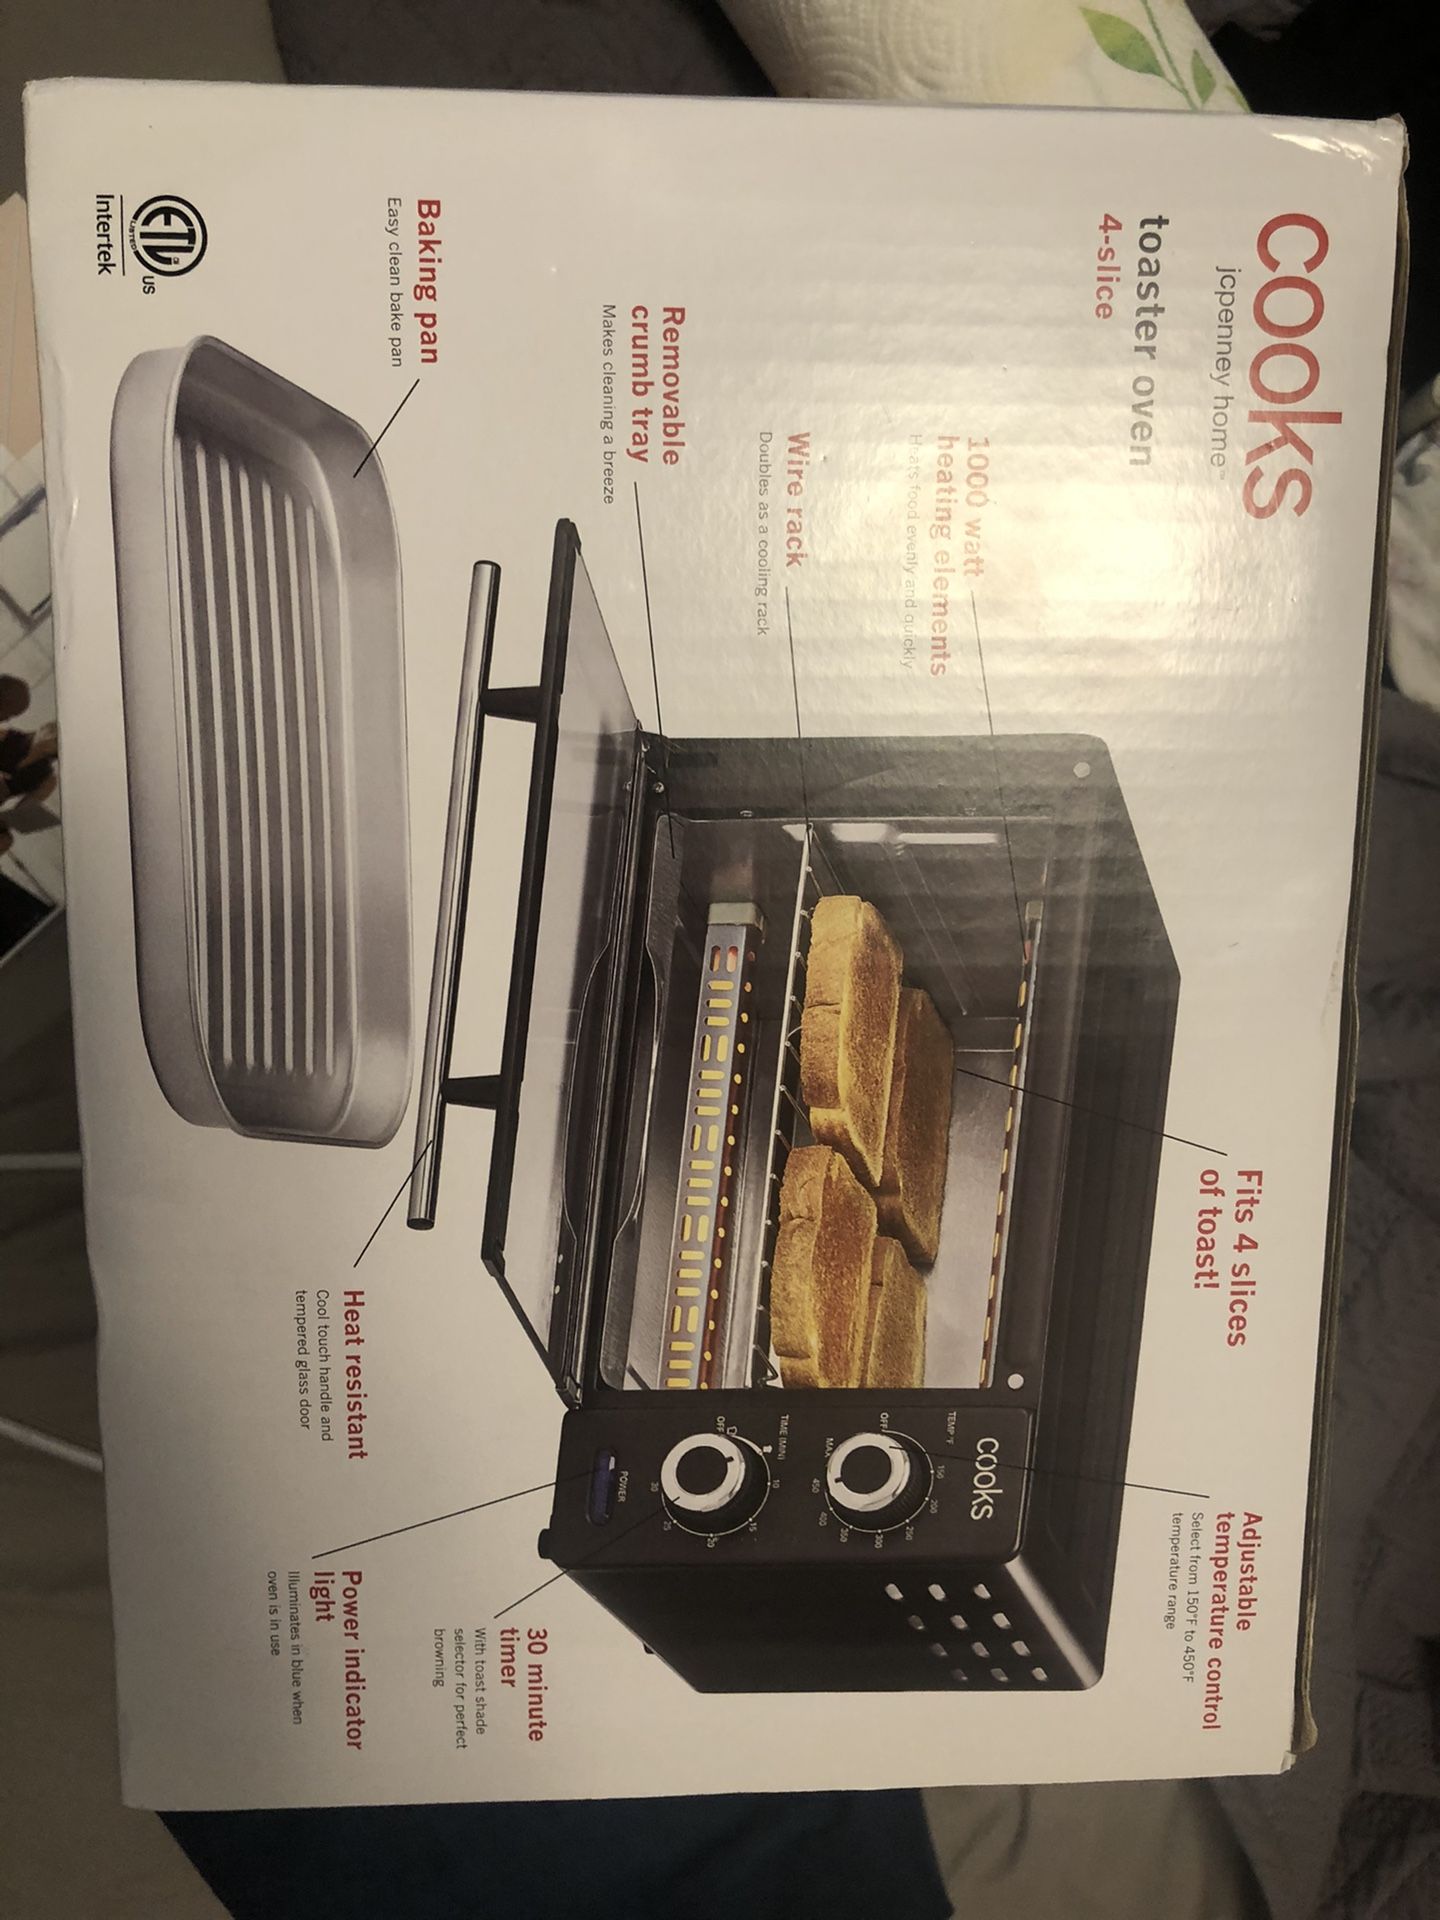 Brand New toaster oven